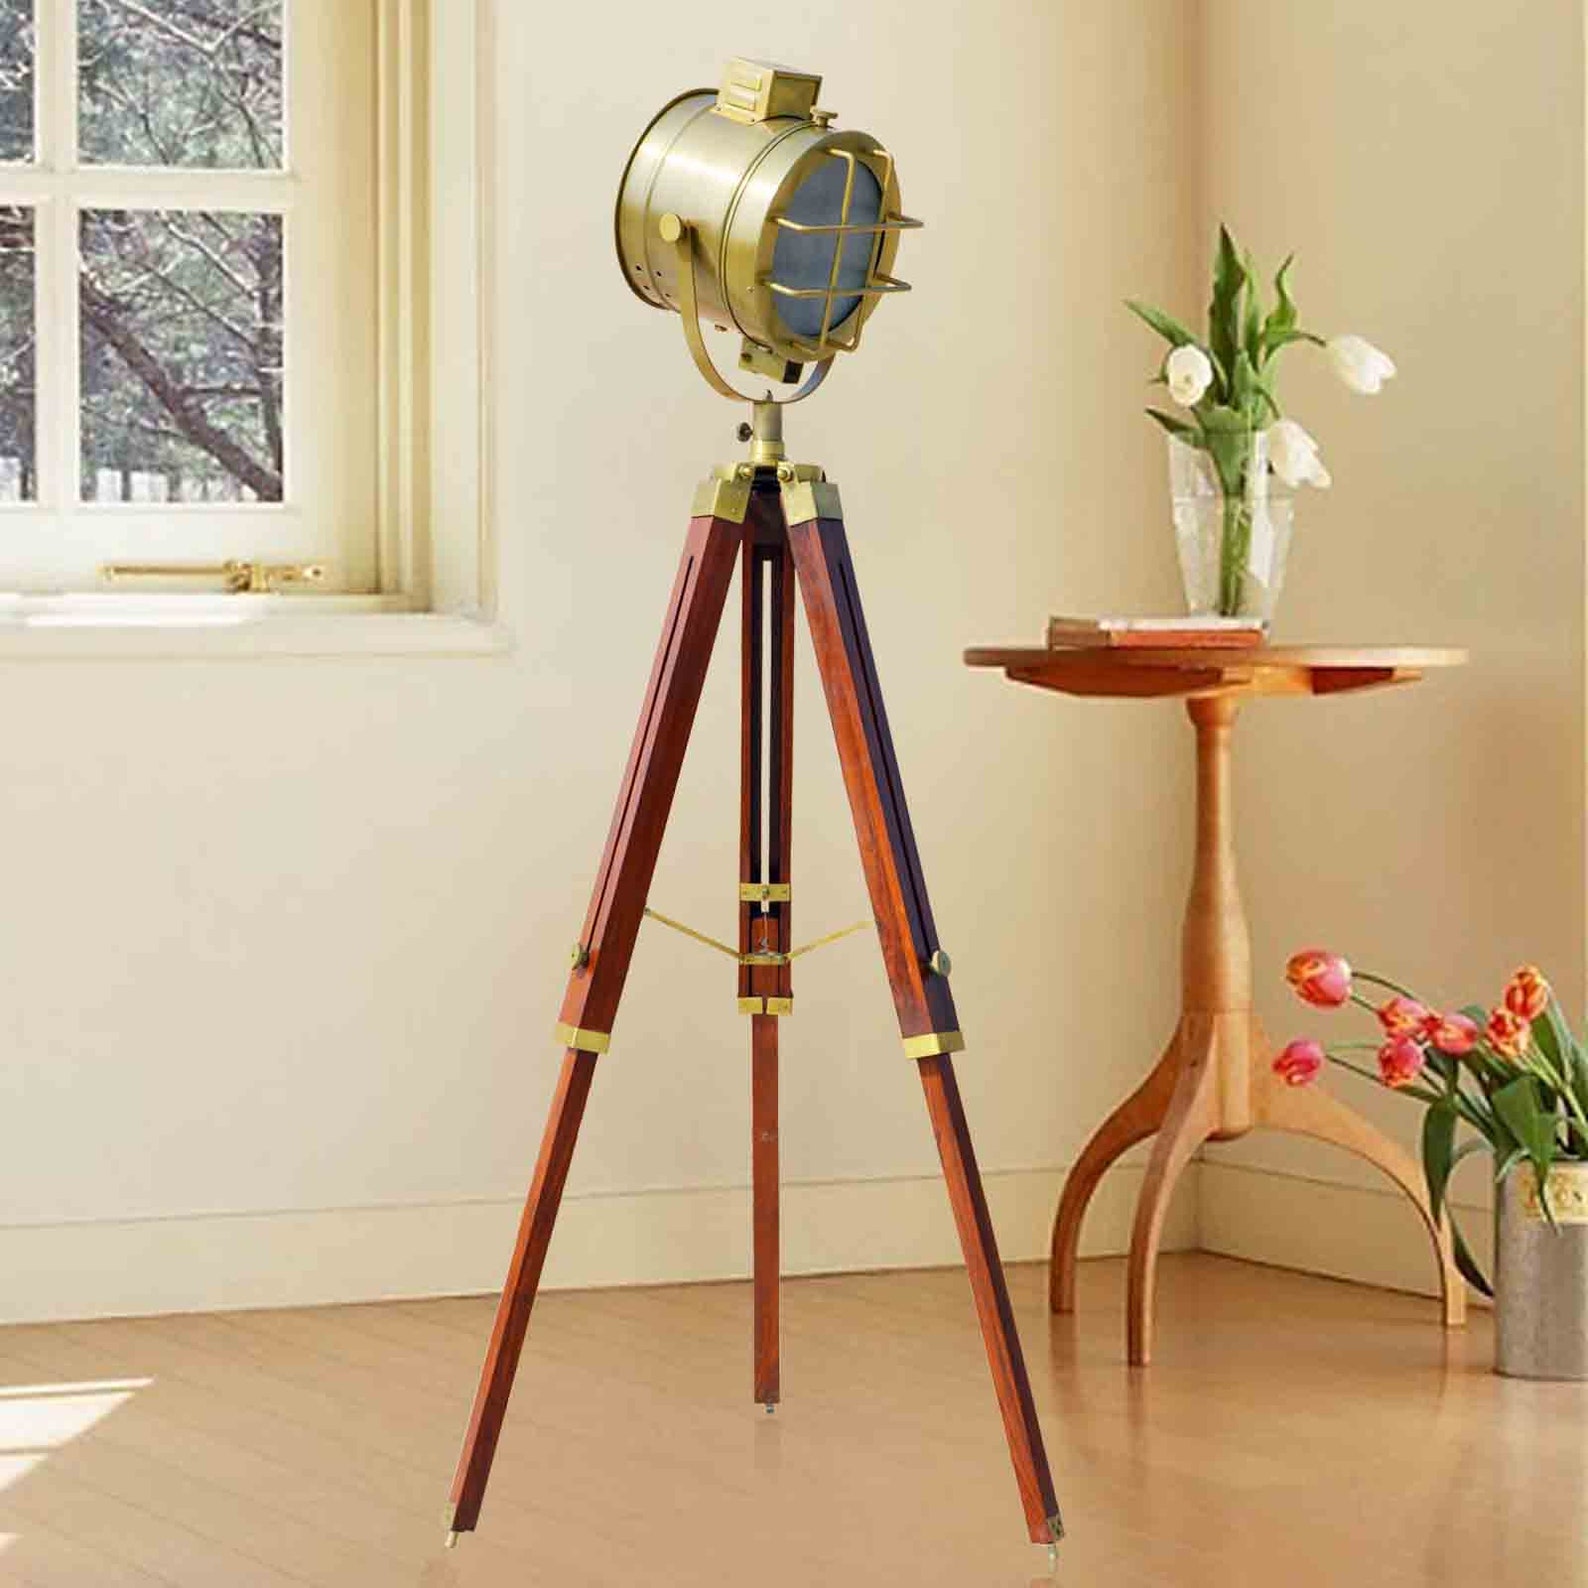 Handcrafted Classical Maritime Vintage Styled Spotlight On Wooden Tripod